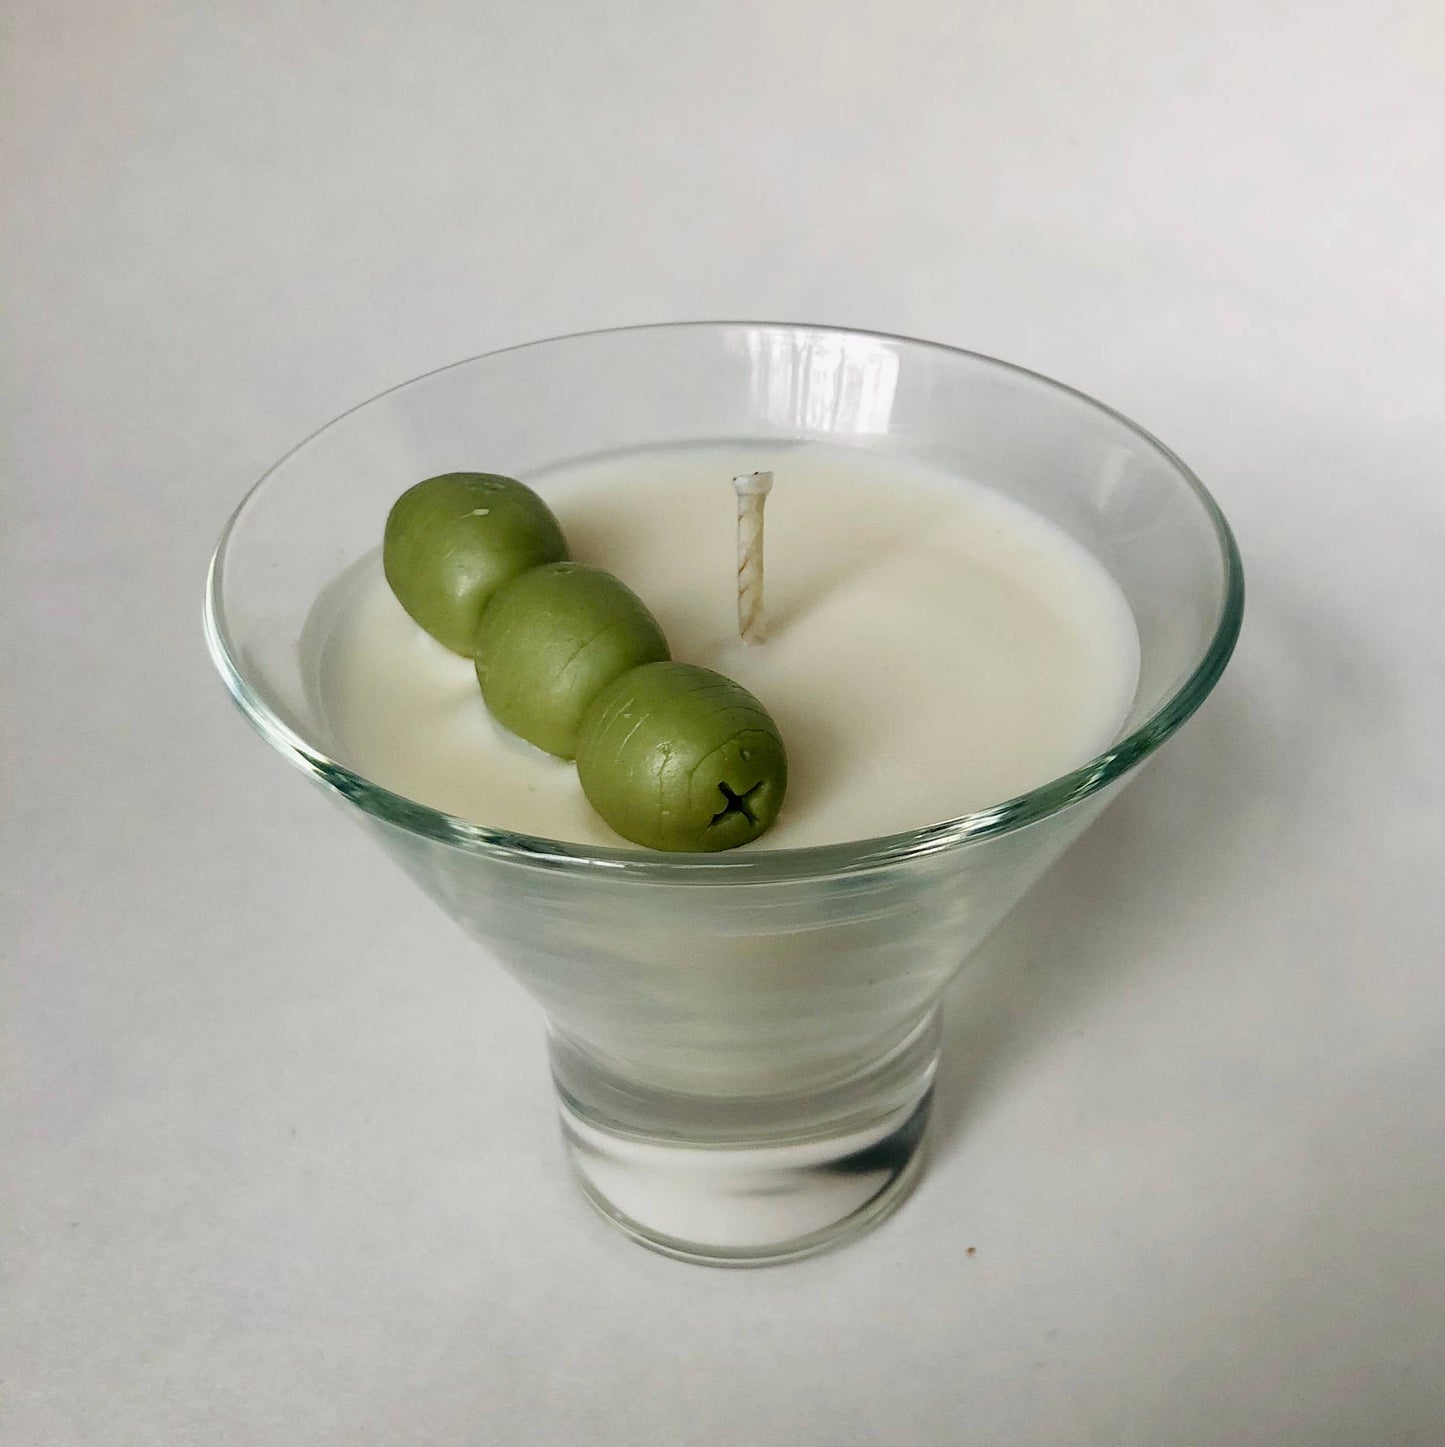 Dirty Martini Cocktail Candle